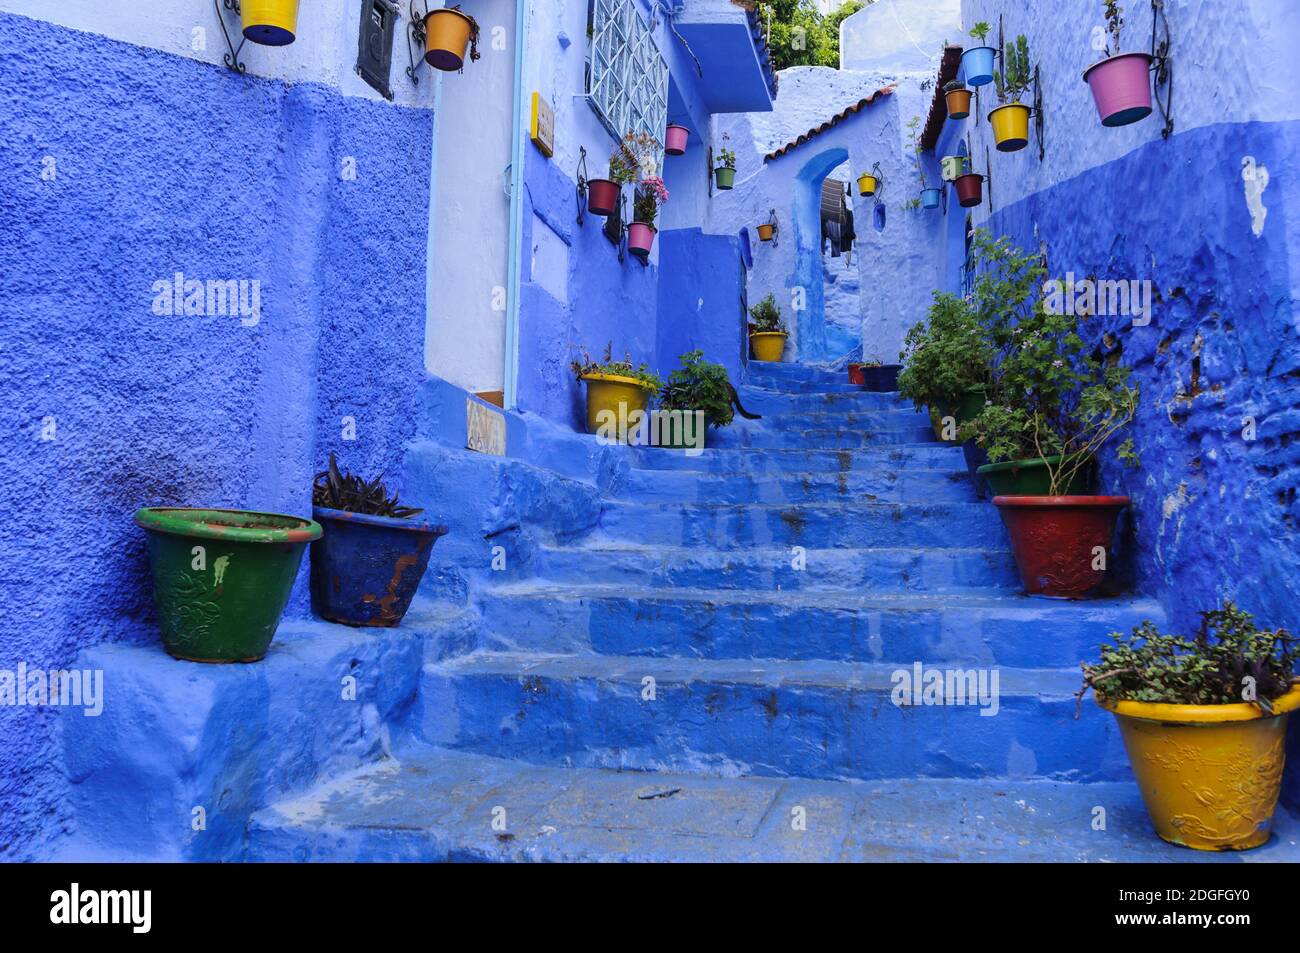 Street in the blue city Chefchaouen, Morocco, Africa. Stock Photo